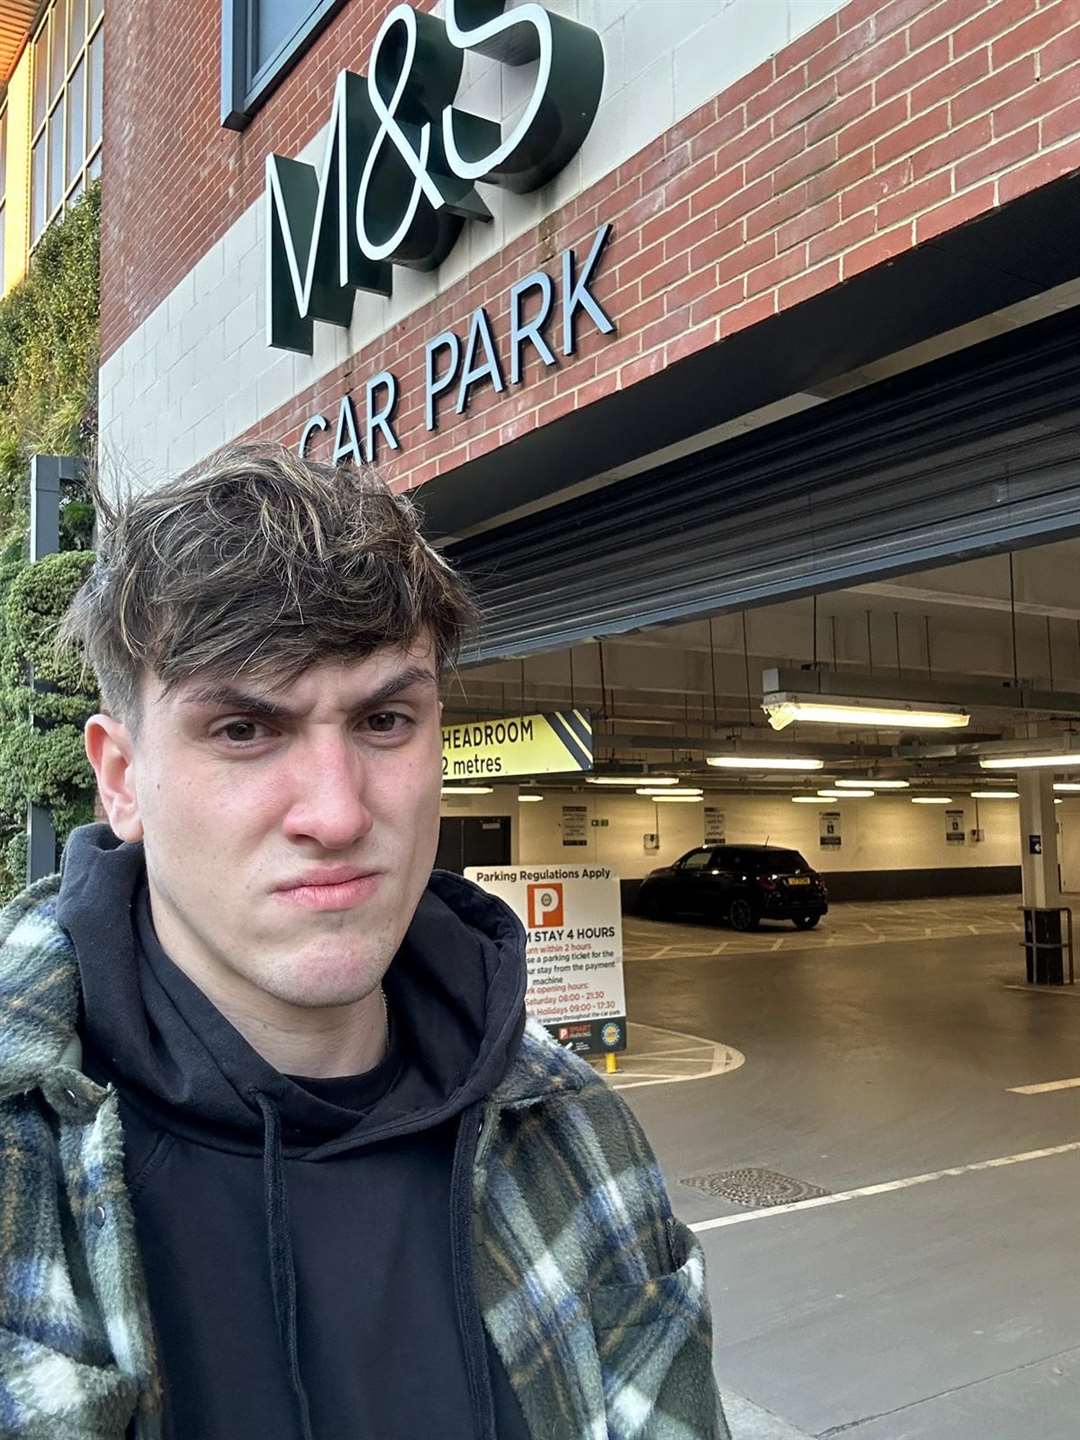 George Hargreaves, from Sevenoaks, outside the M&S car park in London Road. Picture: George Hargreaves (62308510)